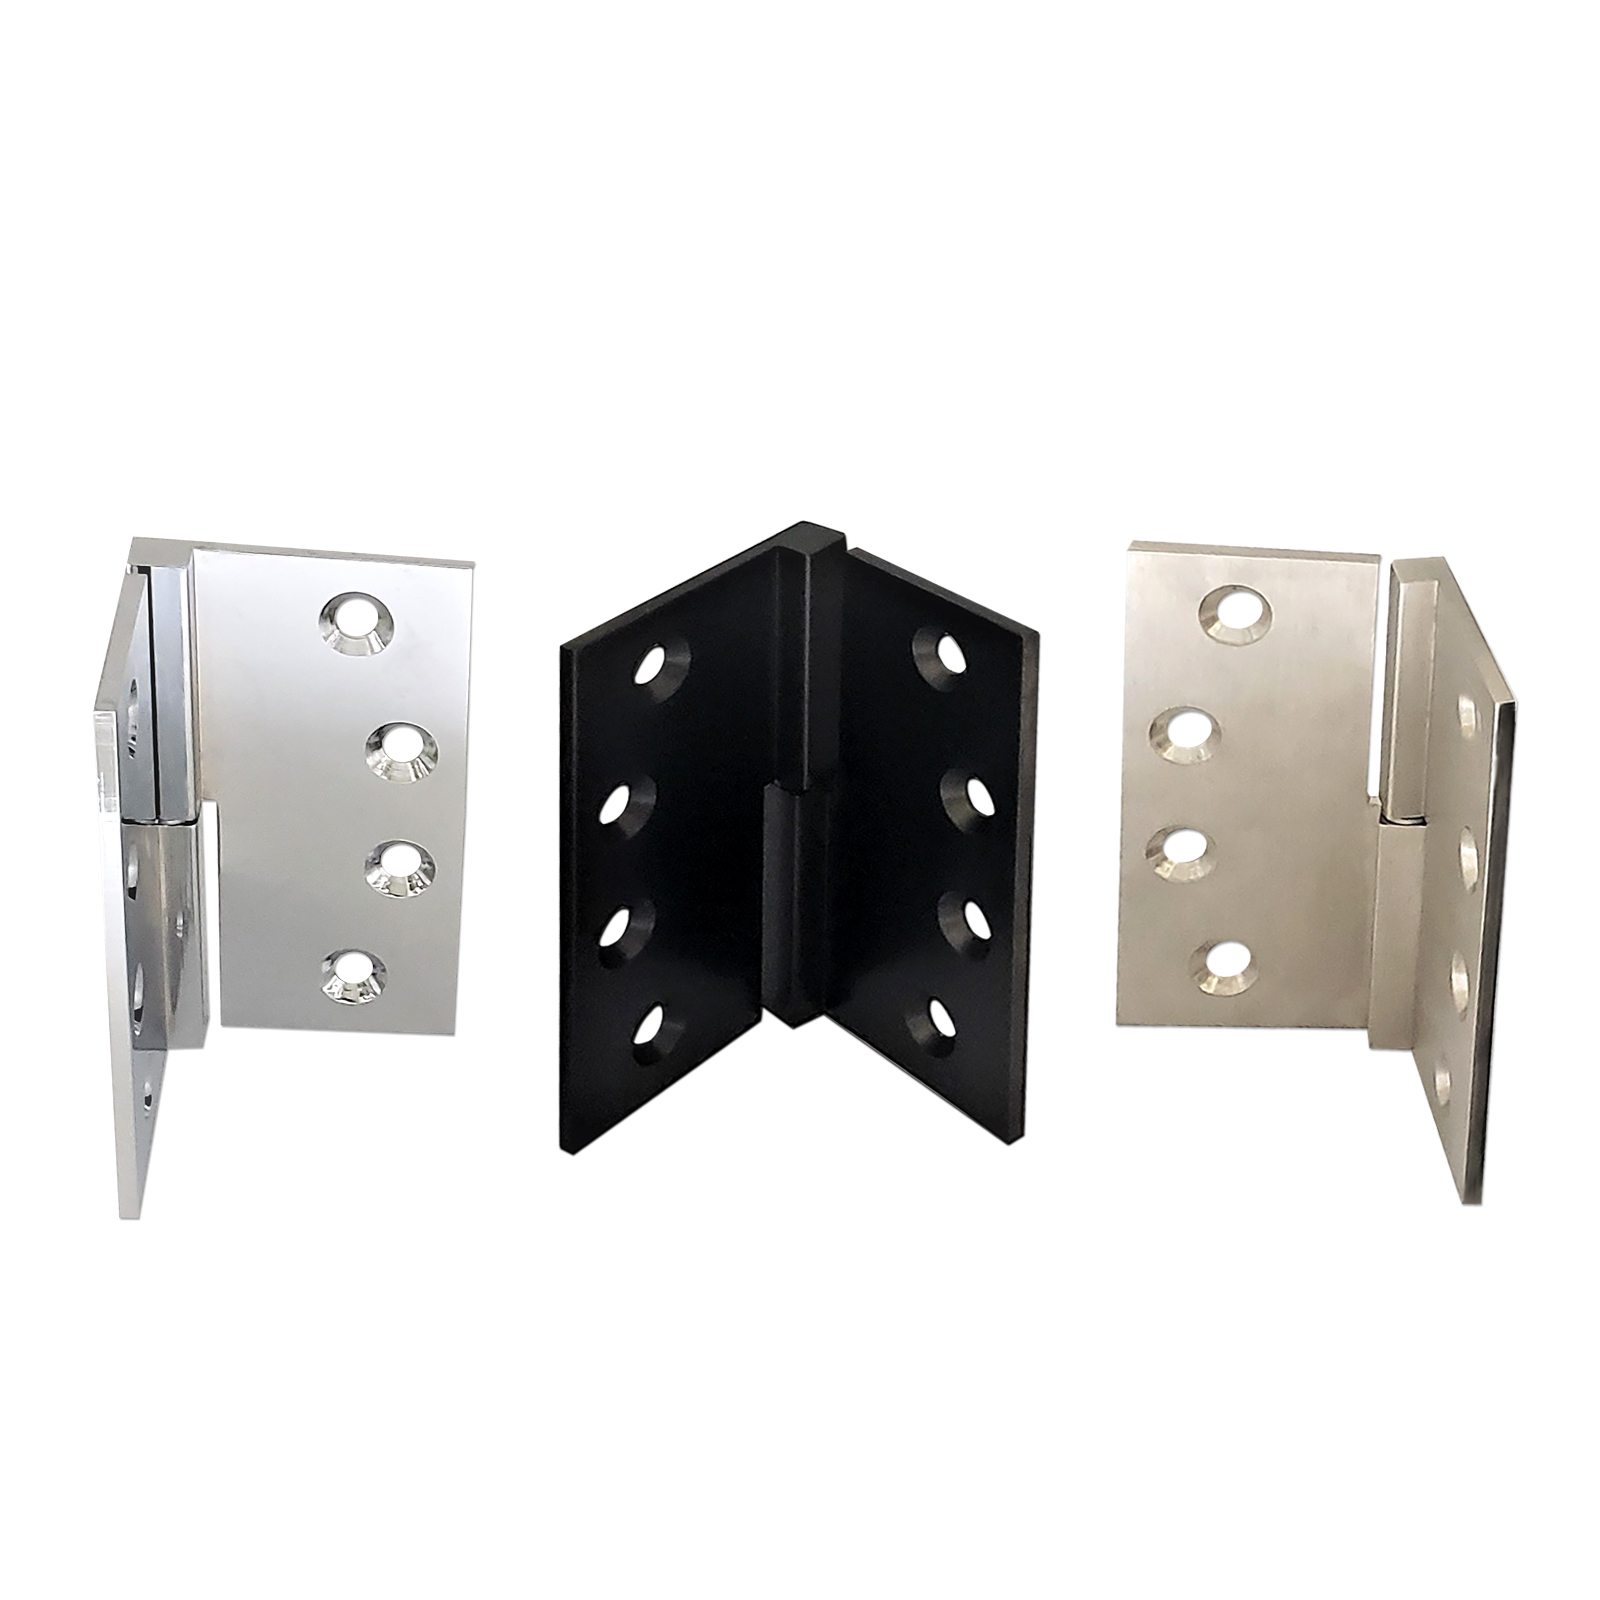 10mm spigots Galvanized iron gate hangers build in hinges  gate hinge 10mm pin 